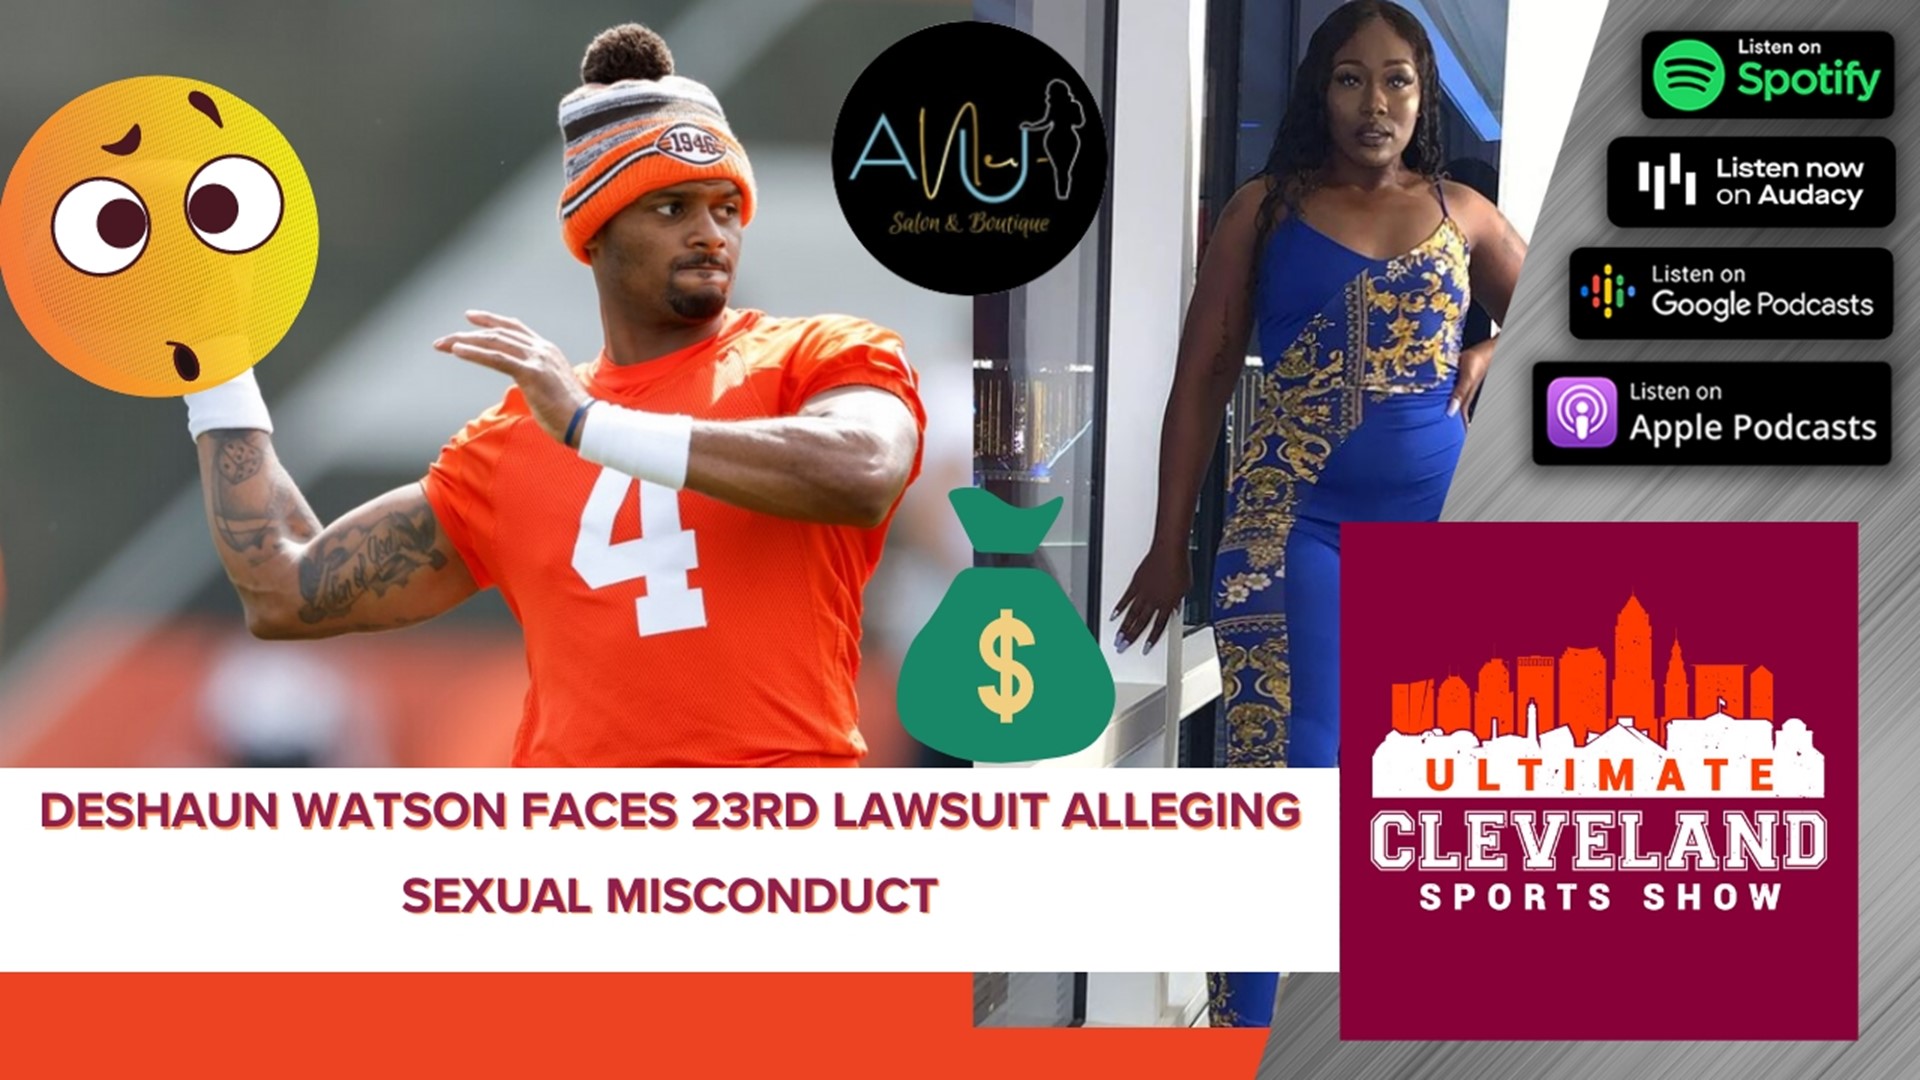 The UCSS crew reacts to Deshaun Watson's 23rd sexual misconduct lawsuit filed by Nia Smith after she watched the HBO special.